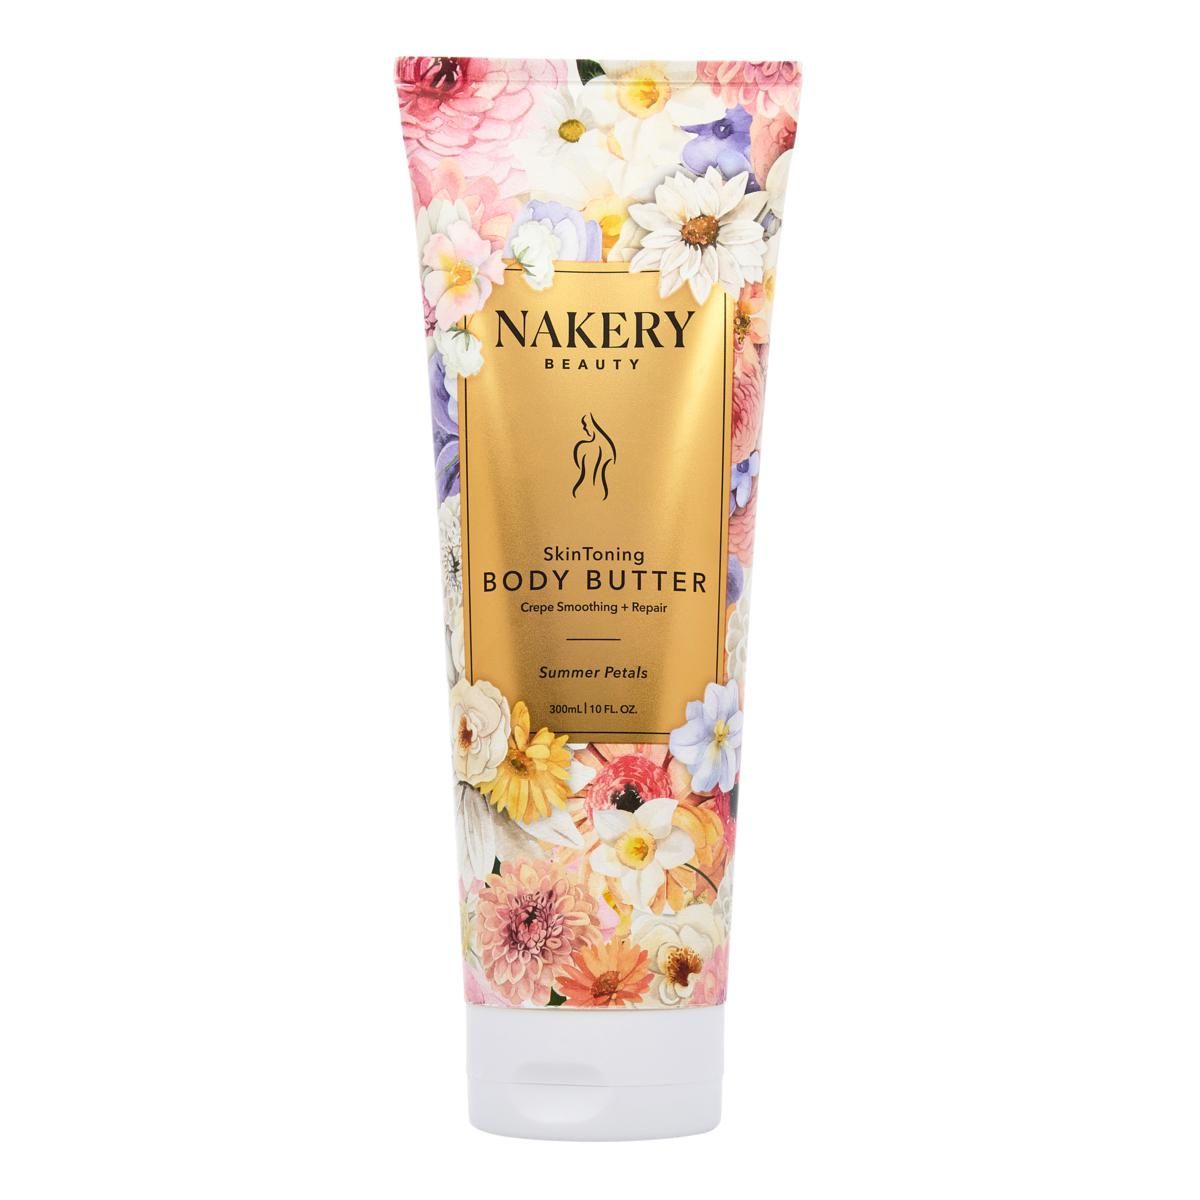 Nakery Beauty Summer Petals Crepe Smoothing & Tightening Body Butter - 22387907 | HSN | HSN